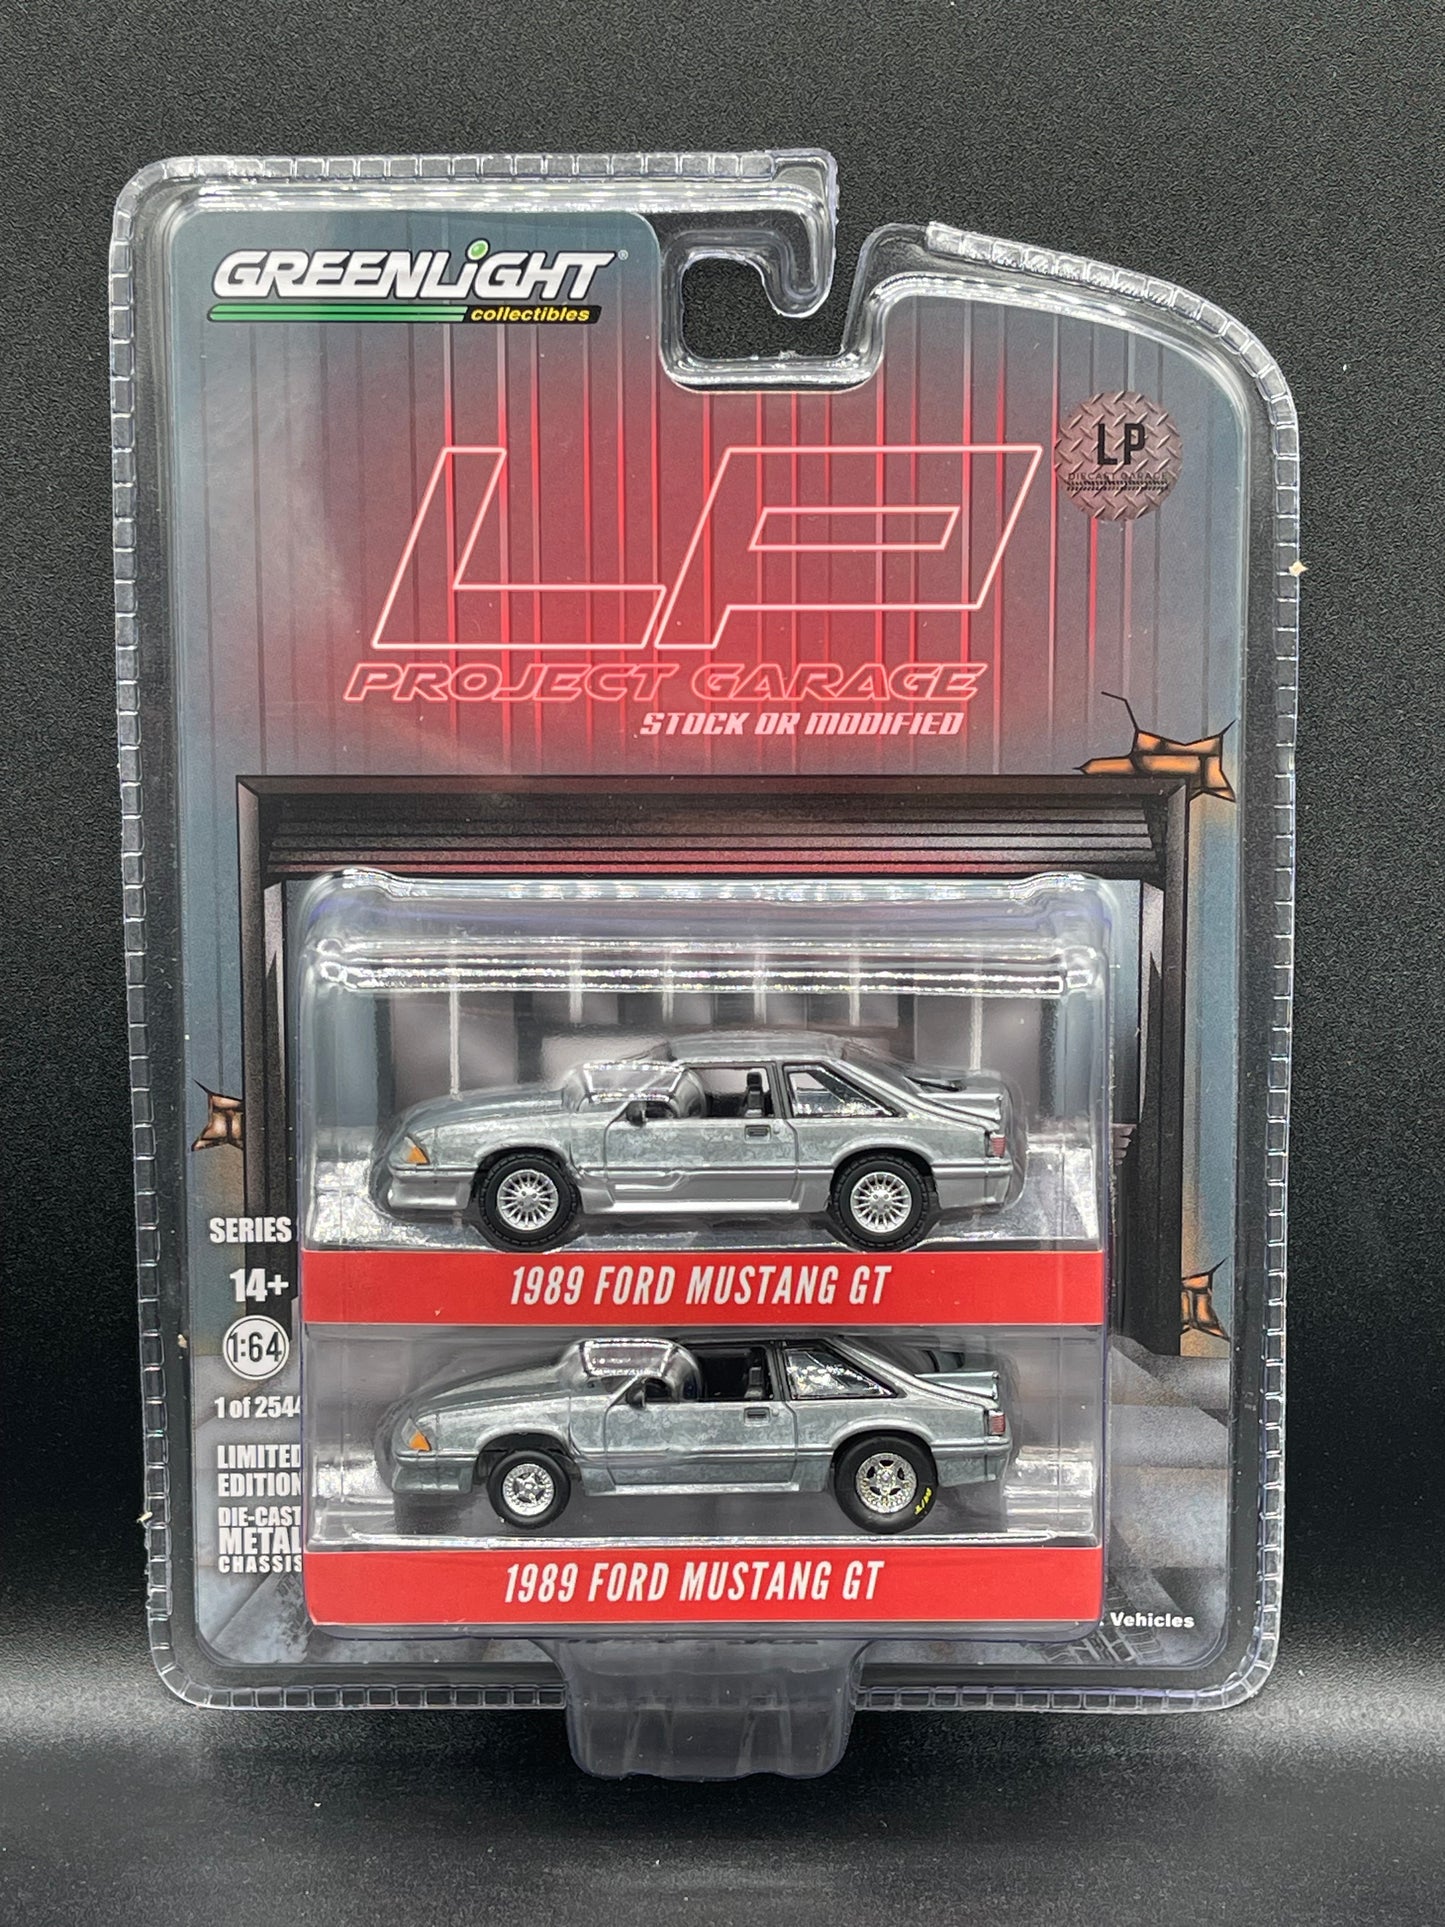 GREENLIGHT *CHASE* Raw 1988 Ford Mustang GT 2-Pack Set Stock or Modified LP Diecast Project Garage Exclusive 1:64 Diecast Promo